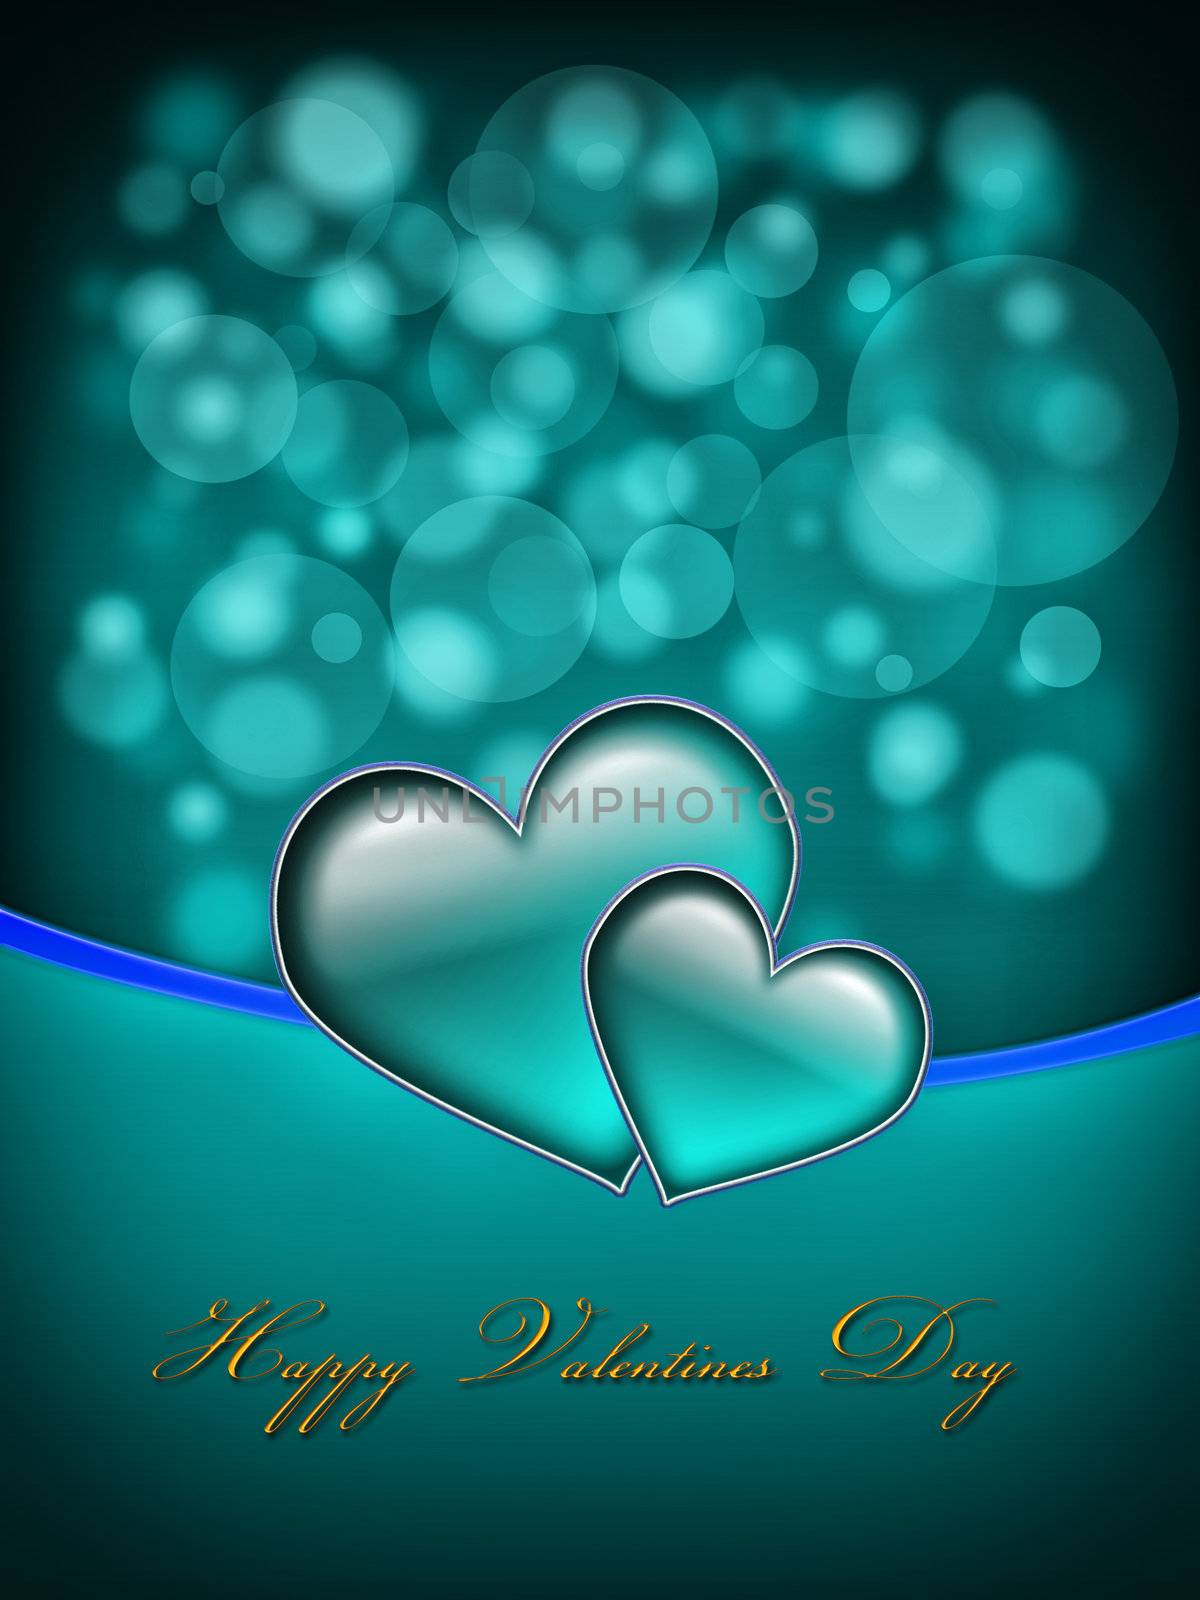 Valentines Day Card with golden Happy Valentines Day text and two big hearts - all in green and blue